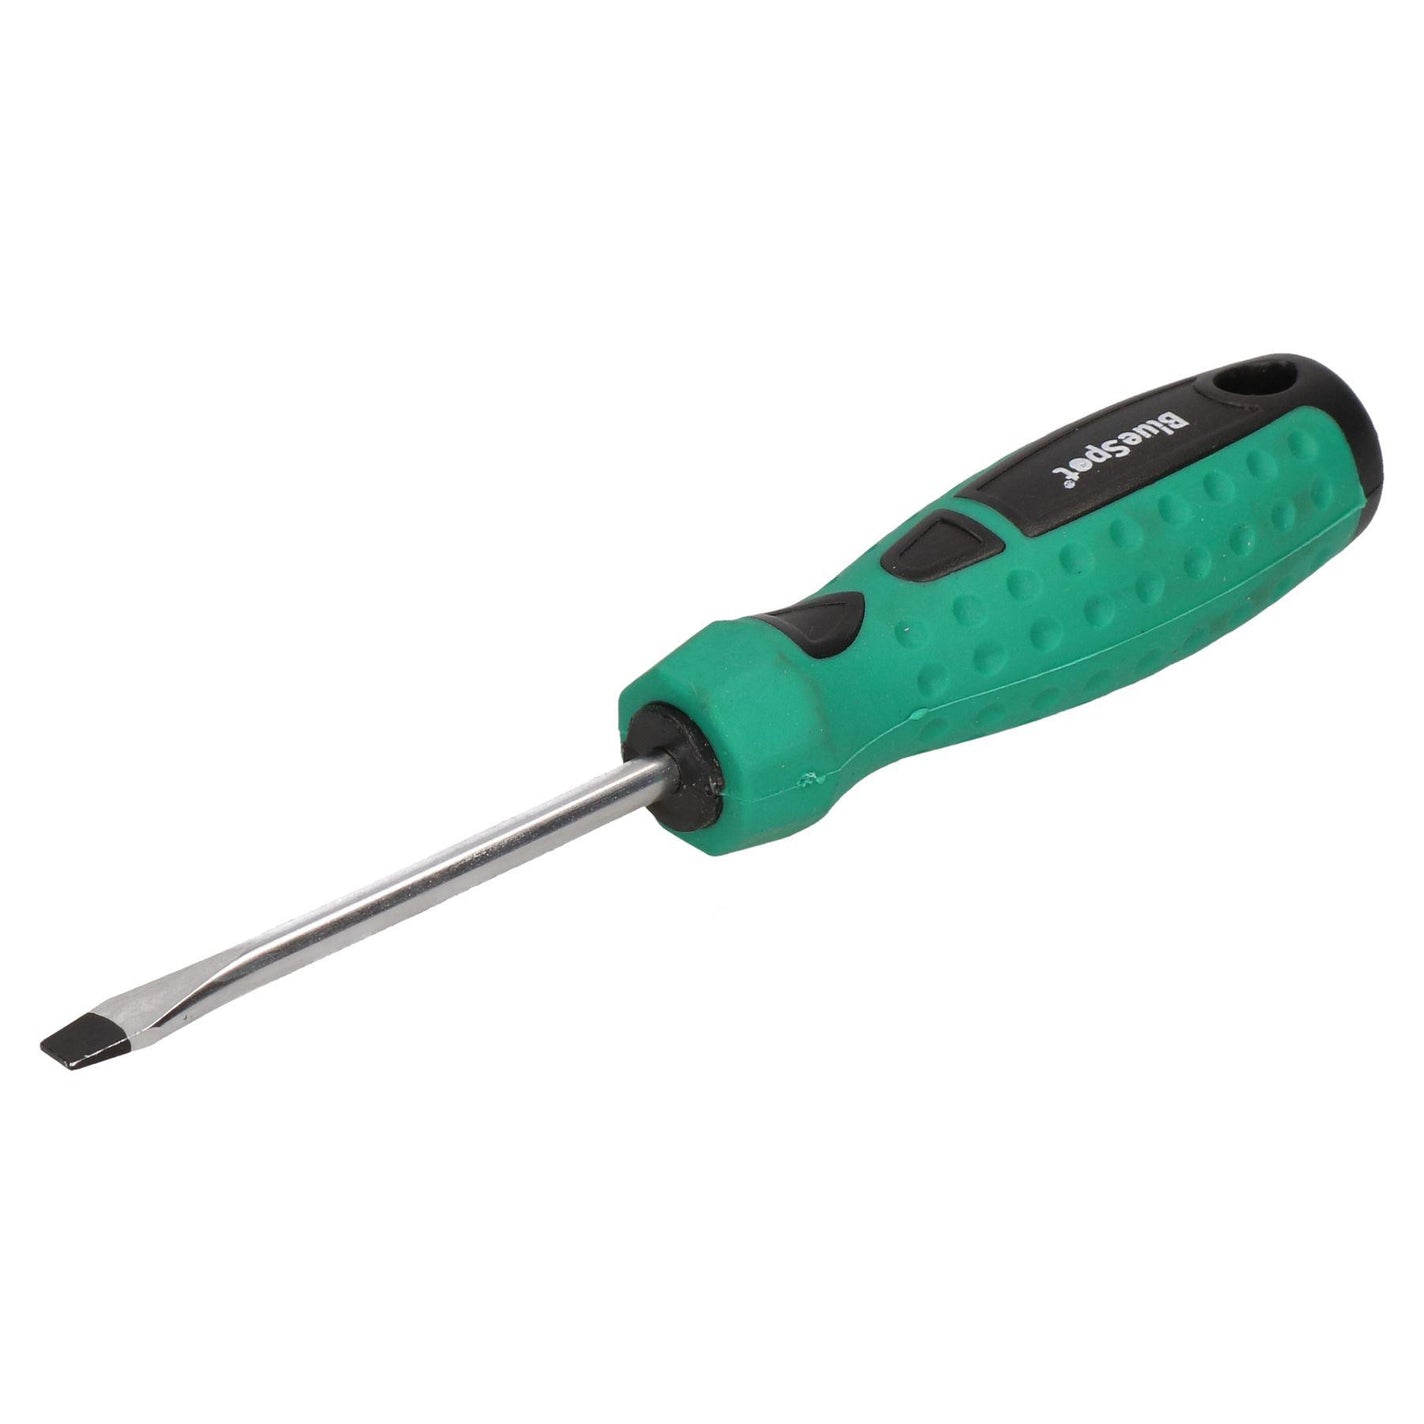 Slotted Flat Headed Screwdriver with Magnetic Tip Rubber Handle 3mm – 9.5mm